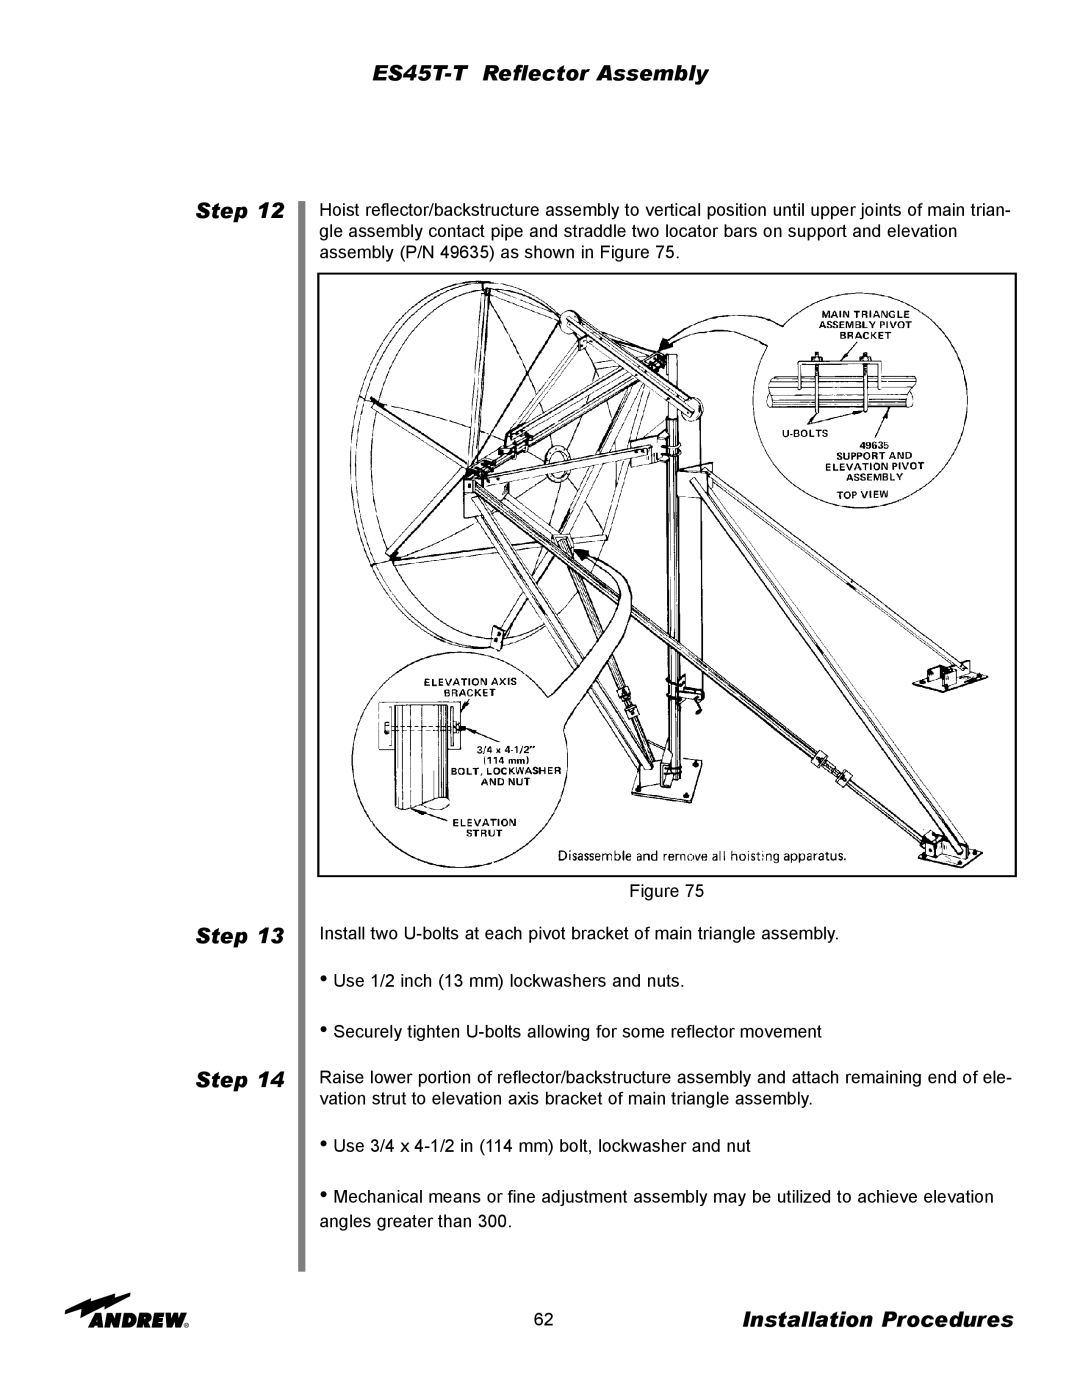 Andrew manual ES45T-TReflector Assembly, Step Step Step, Installation Procedures 